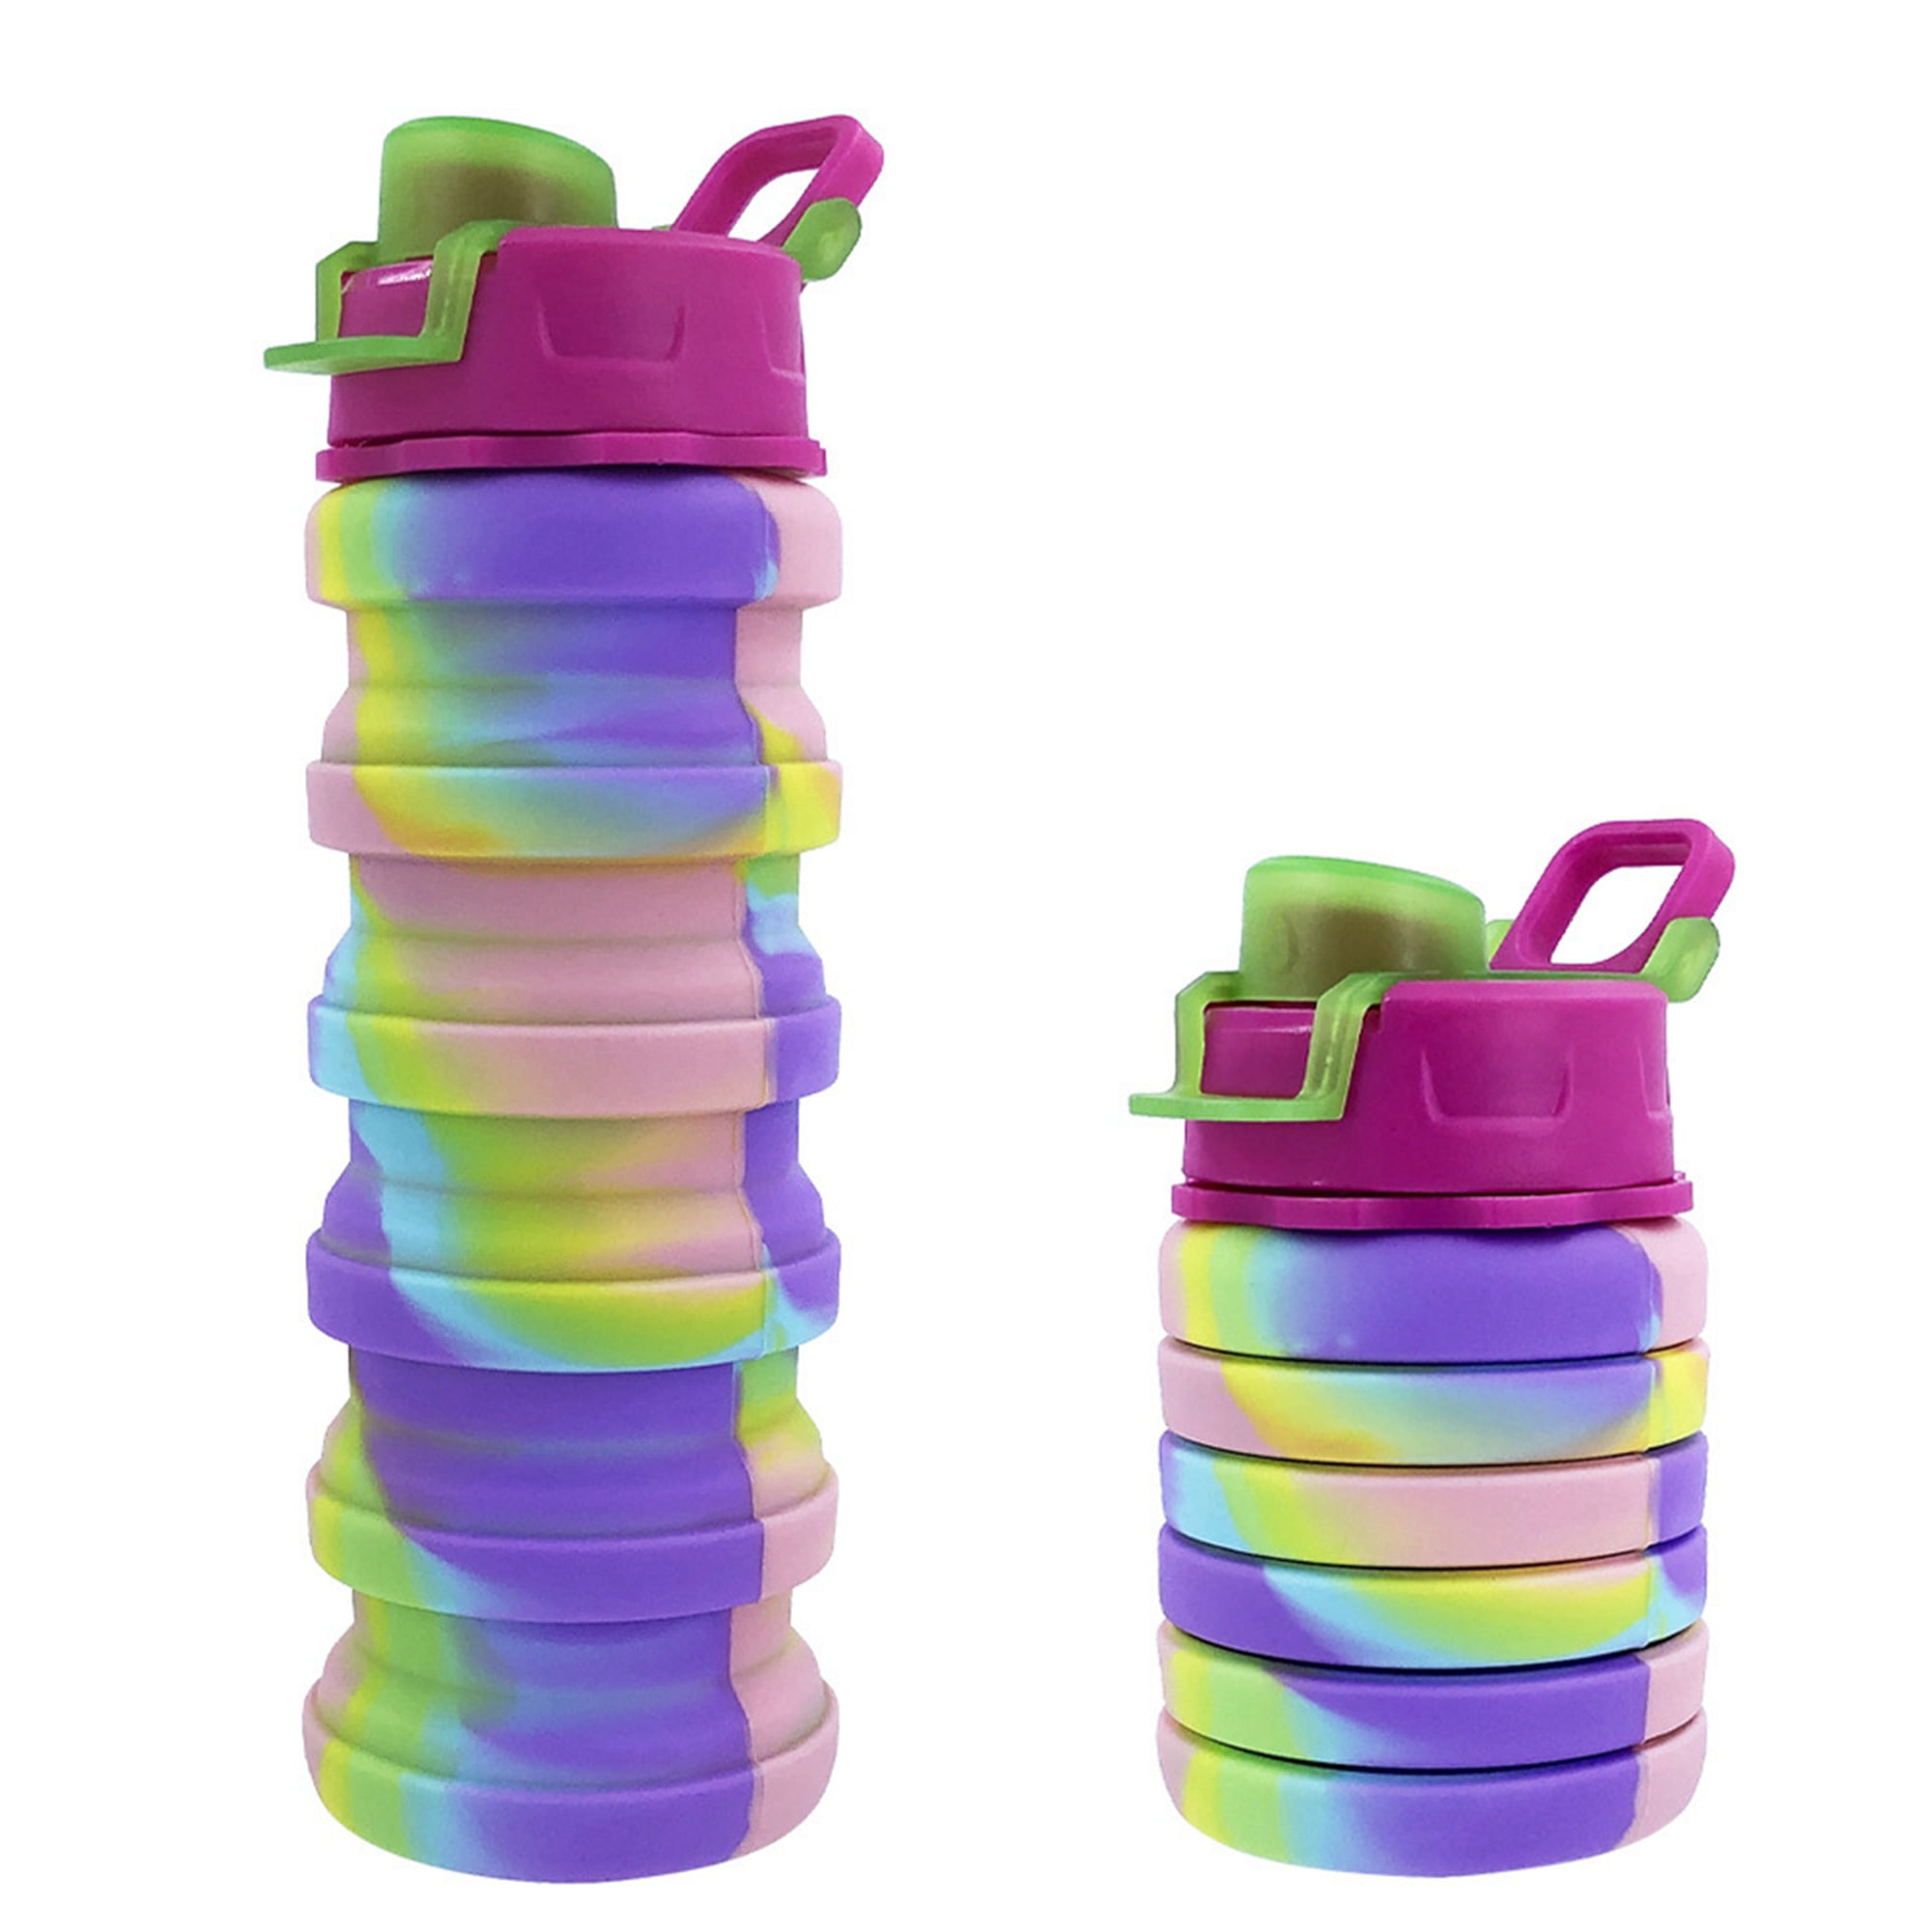 Silicone Collapsible Water Bottles, Kids Water Bottle, Pop Its Water Bottle  for Toddlers, Camping Cu…See more Silicone Collapsible Water Bottles, Kids